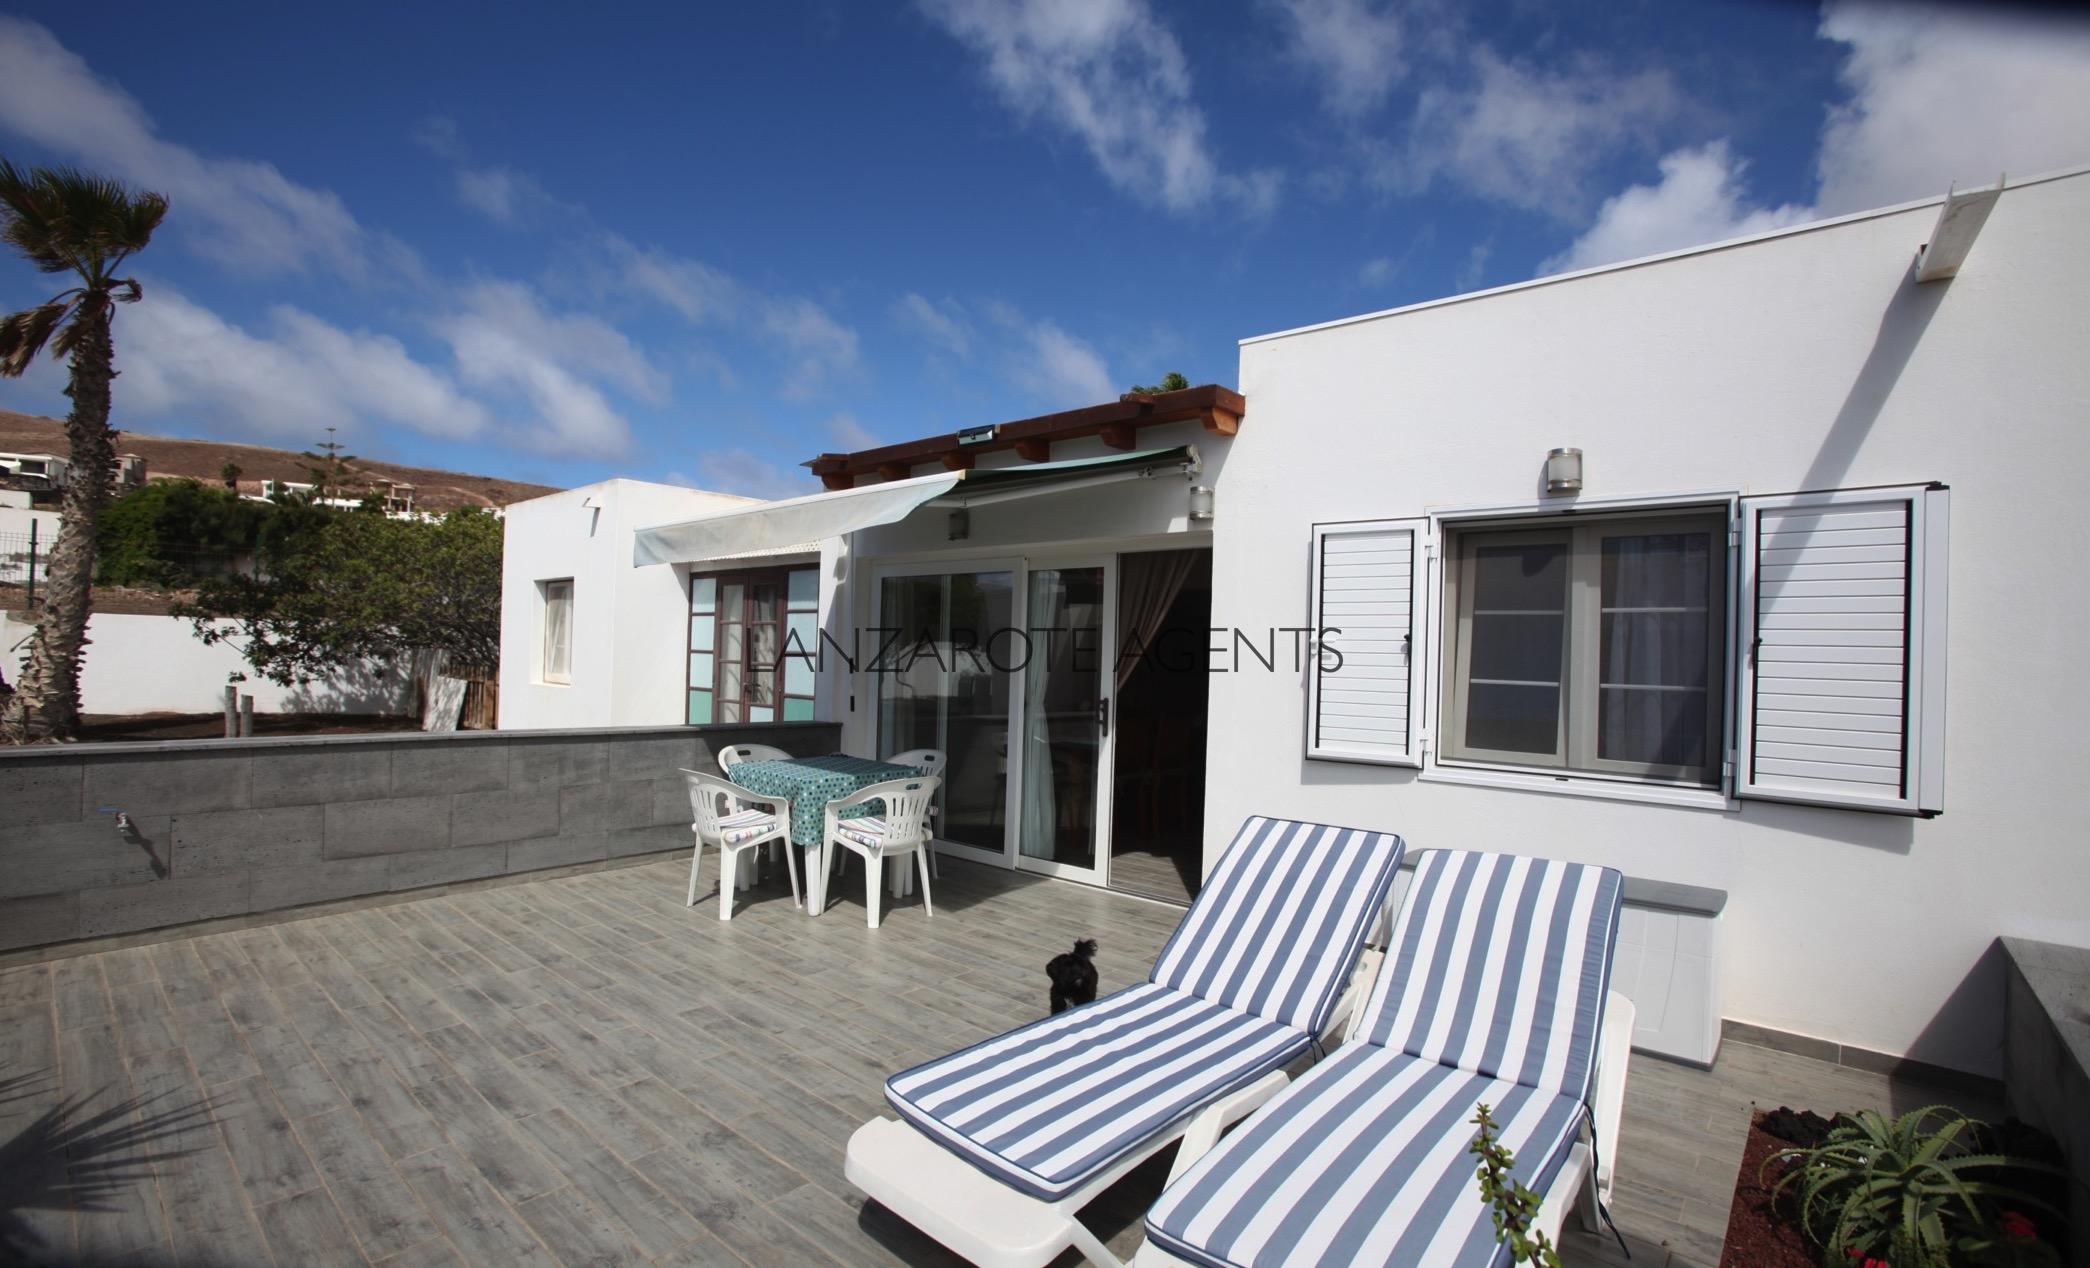 Immaculate Bungalow With South Facing Terrace, Views And Communal Pool, Investment Opportunity!